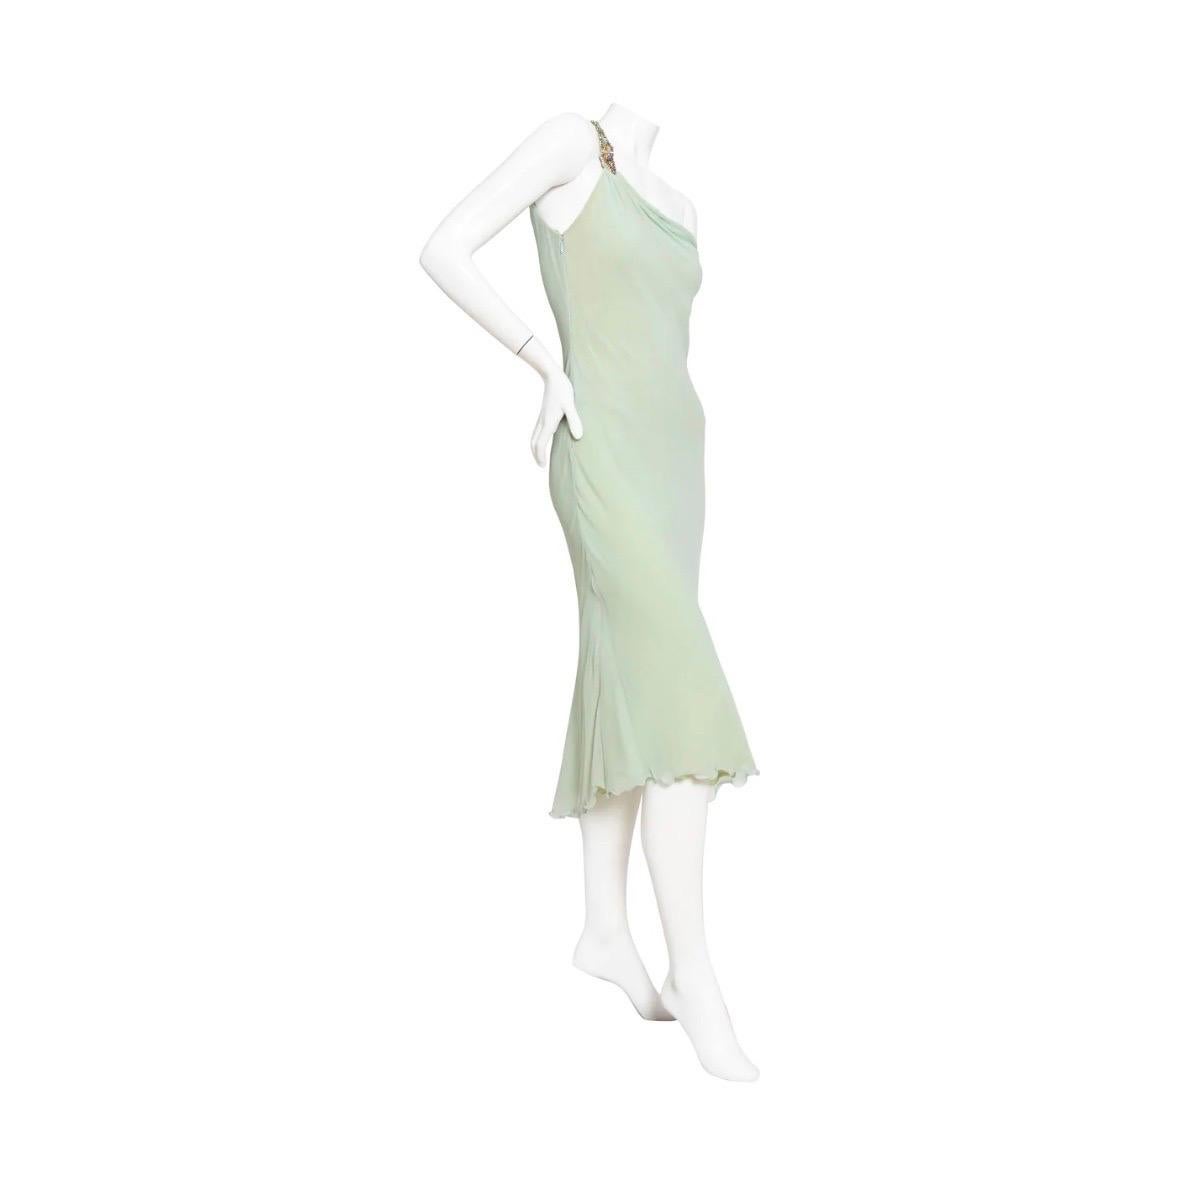 One Shoulder Crystal and Silk Green Dress by Versace Atelier
Circa late 1980s
Two-tone; top layer is mint green and bottom is pale chartreuse
Multicolored crystal embellished strap
Bias silhouette
Ruffled hem
Side zipper closure
Semi-sheer
Nude